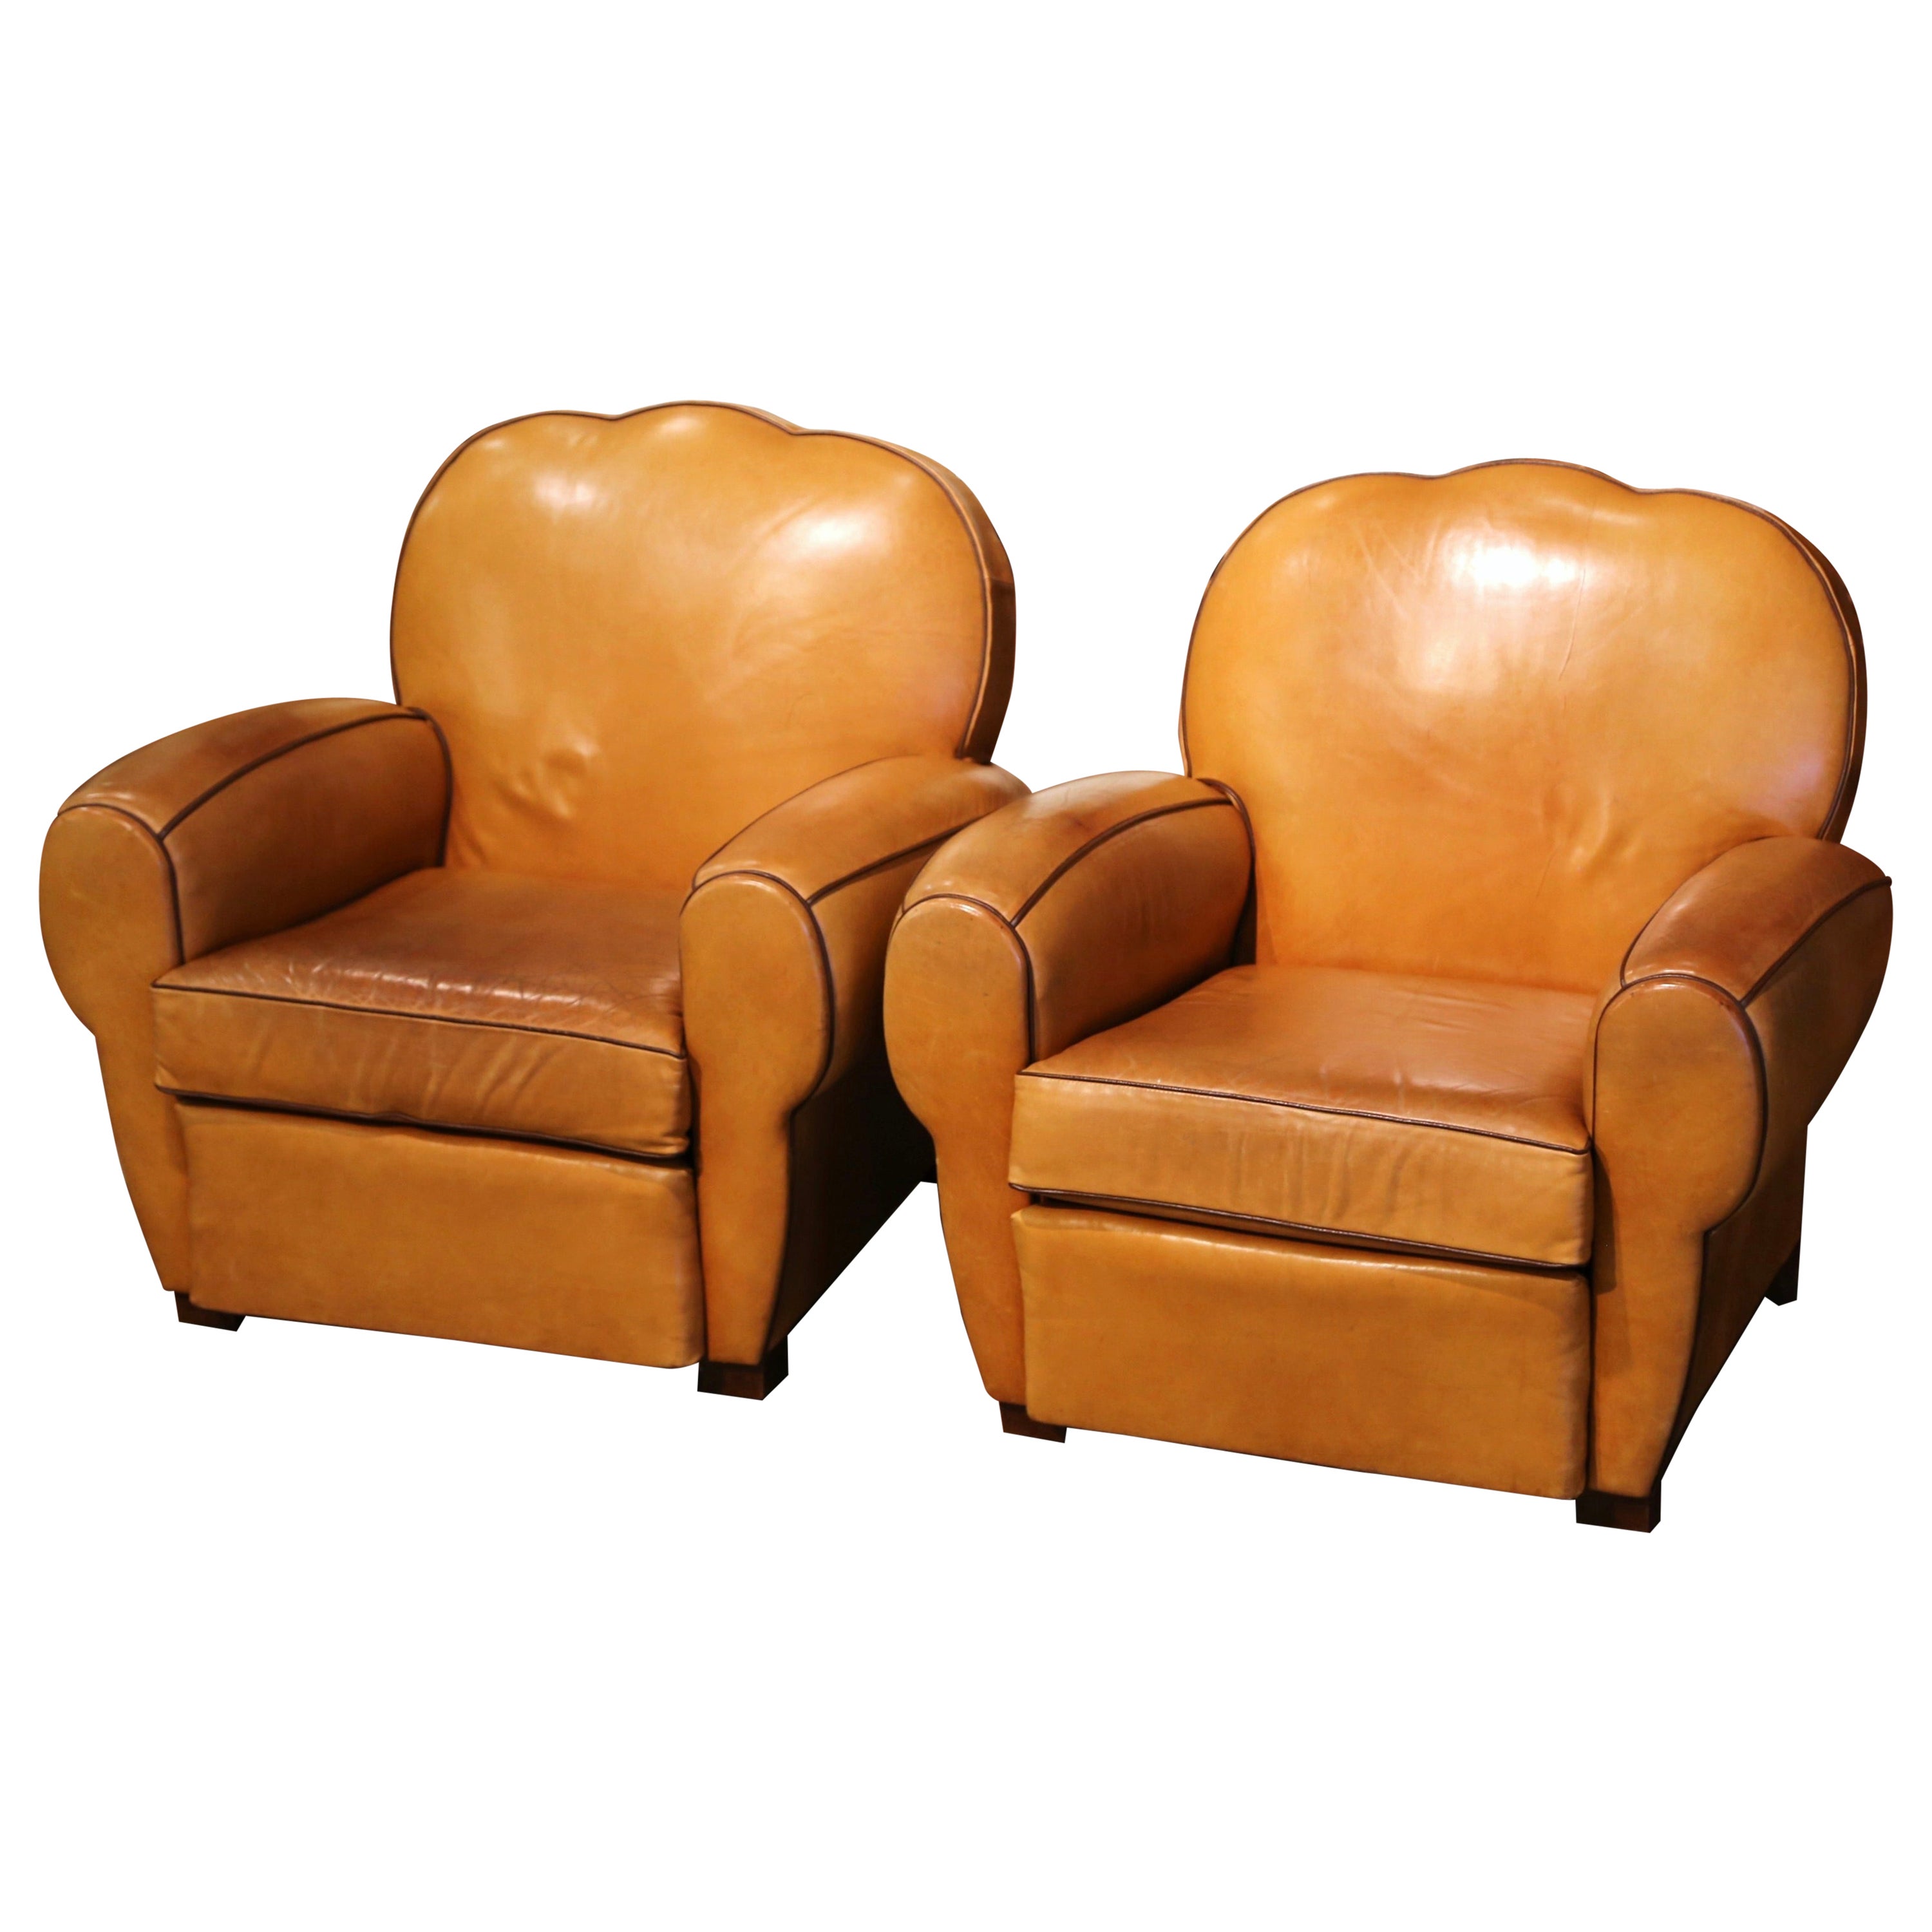 Pair of Mid-Century French Carved Club Armchairs with Original Tan Leather